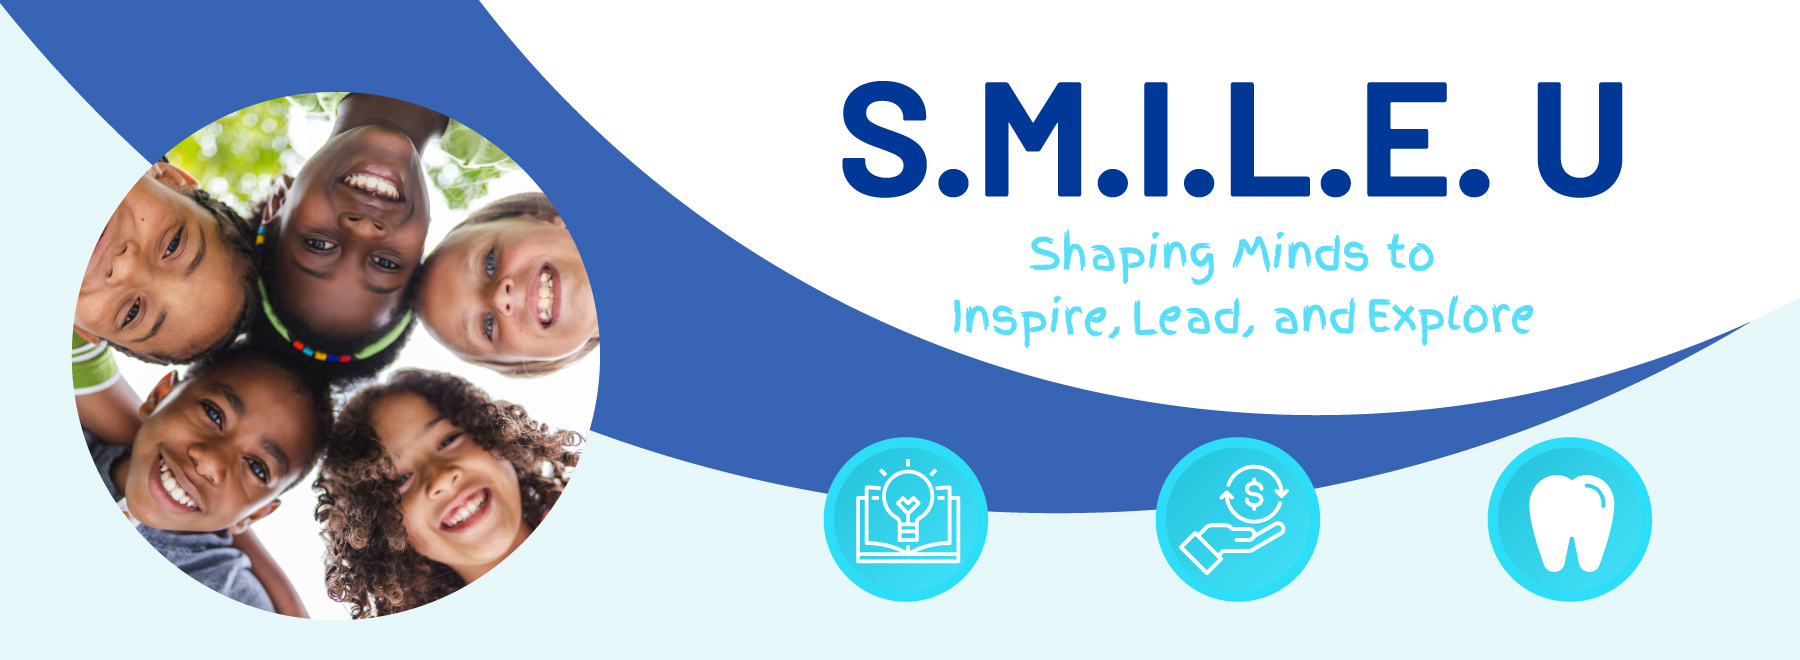 Circle inset of five smiling children standing in a circle from above. Text to right reads SMILE U: Shaping Minds to Inspire, Lead, and Explore.